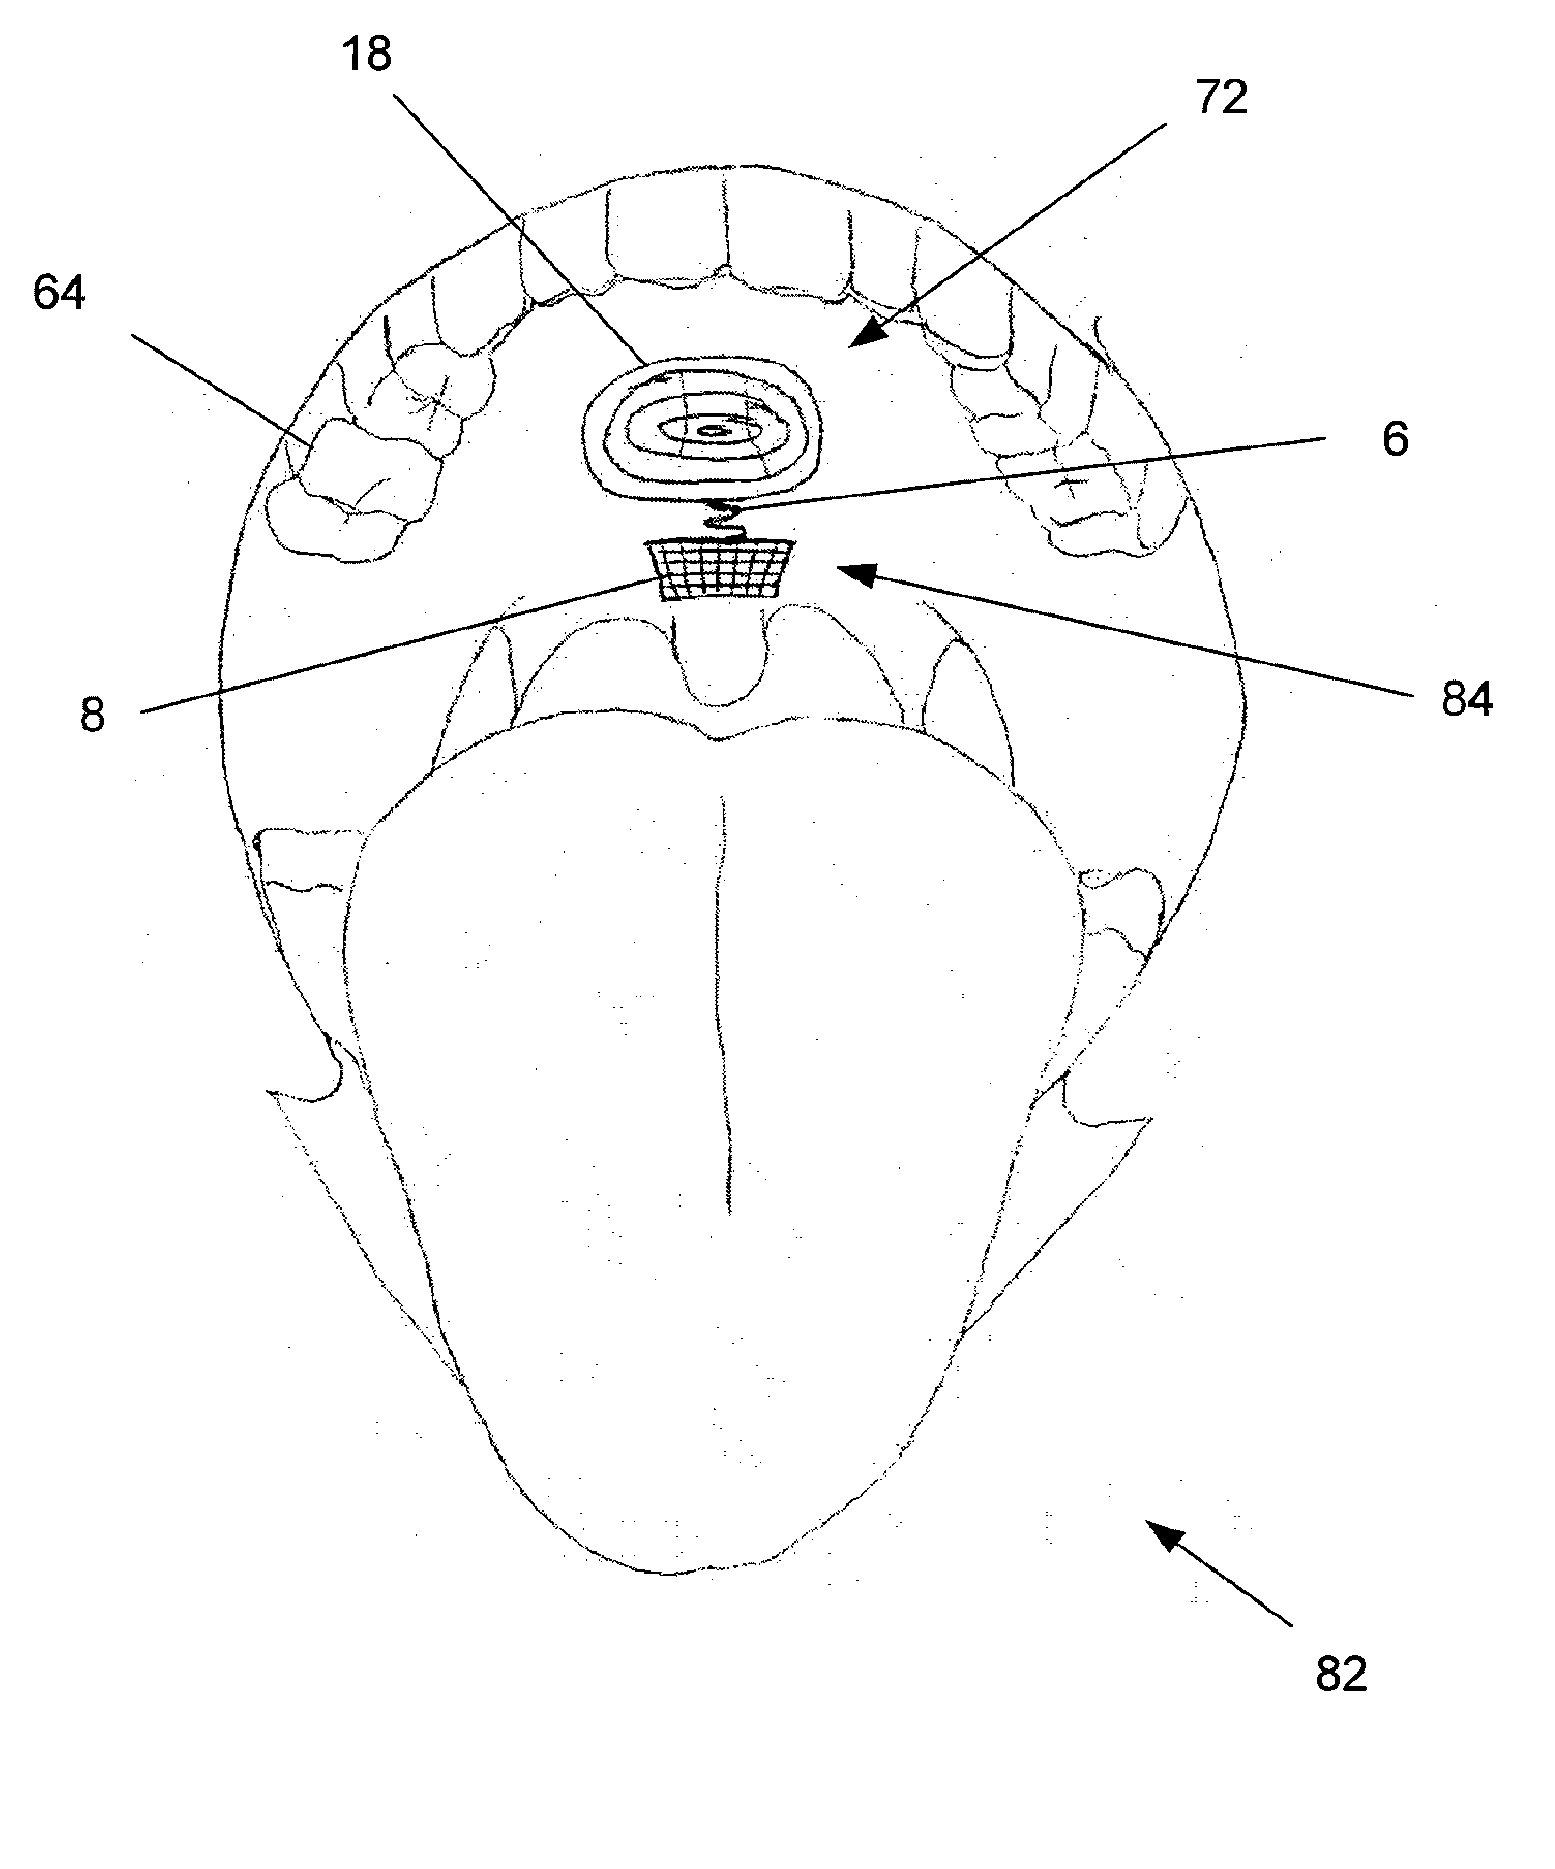 Tethered Airway Implants and Methods of Using the Same